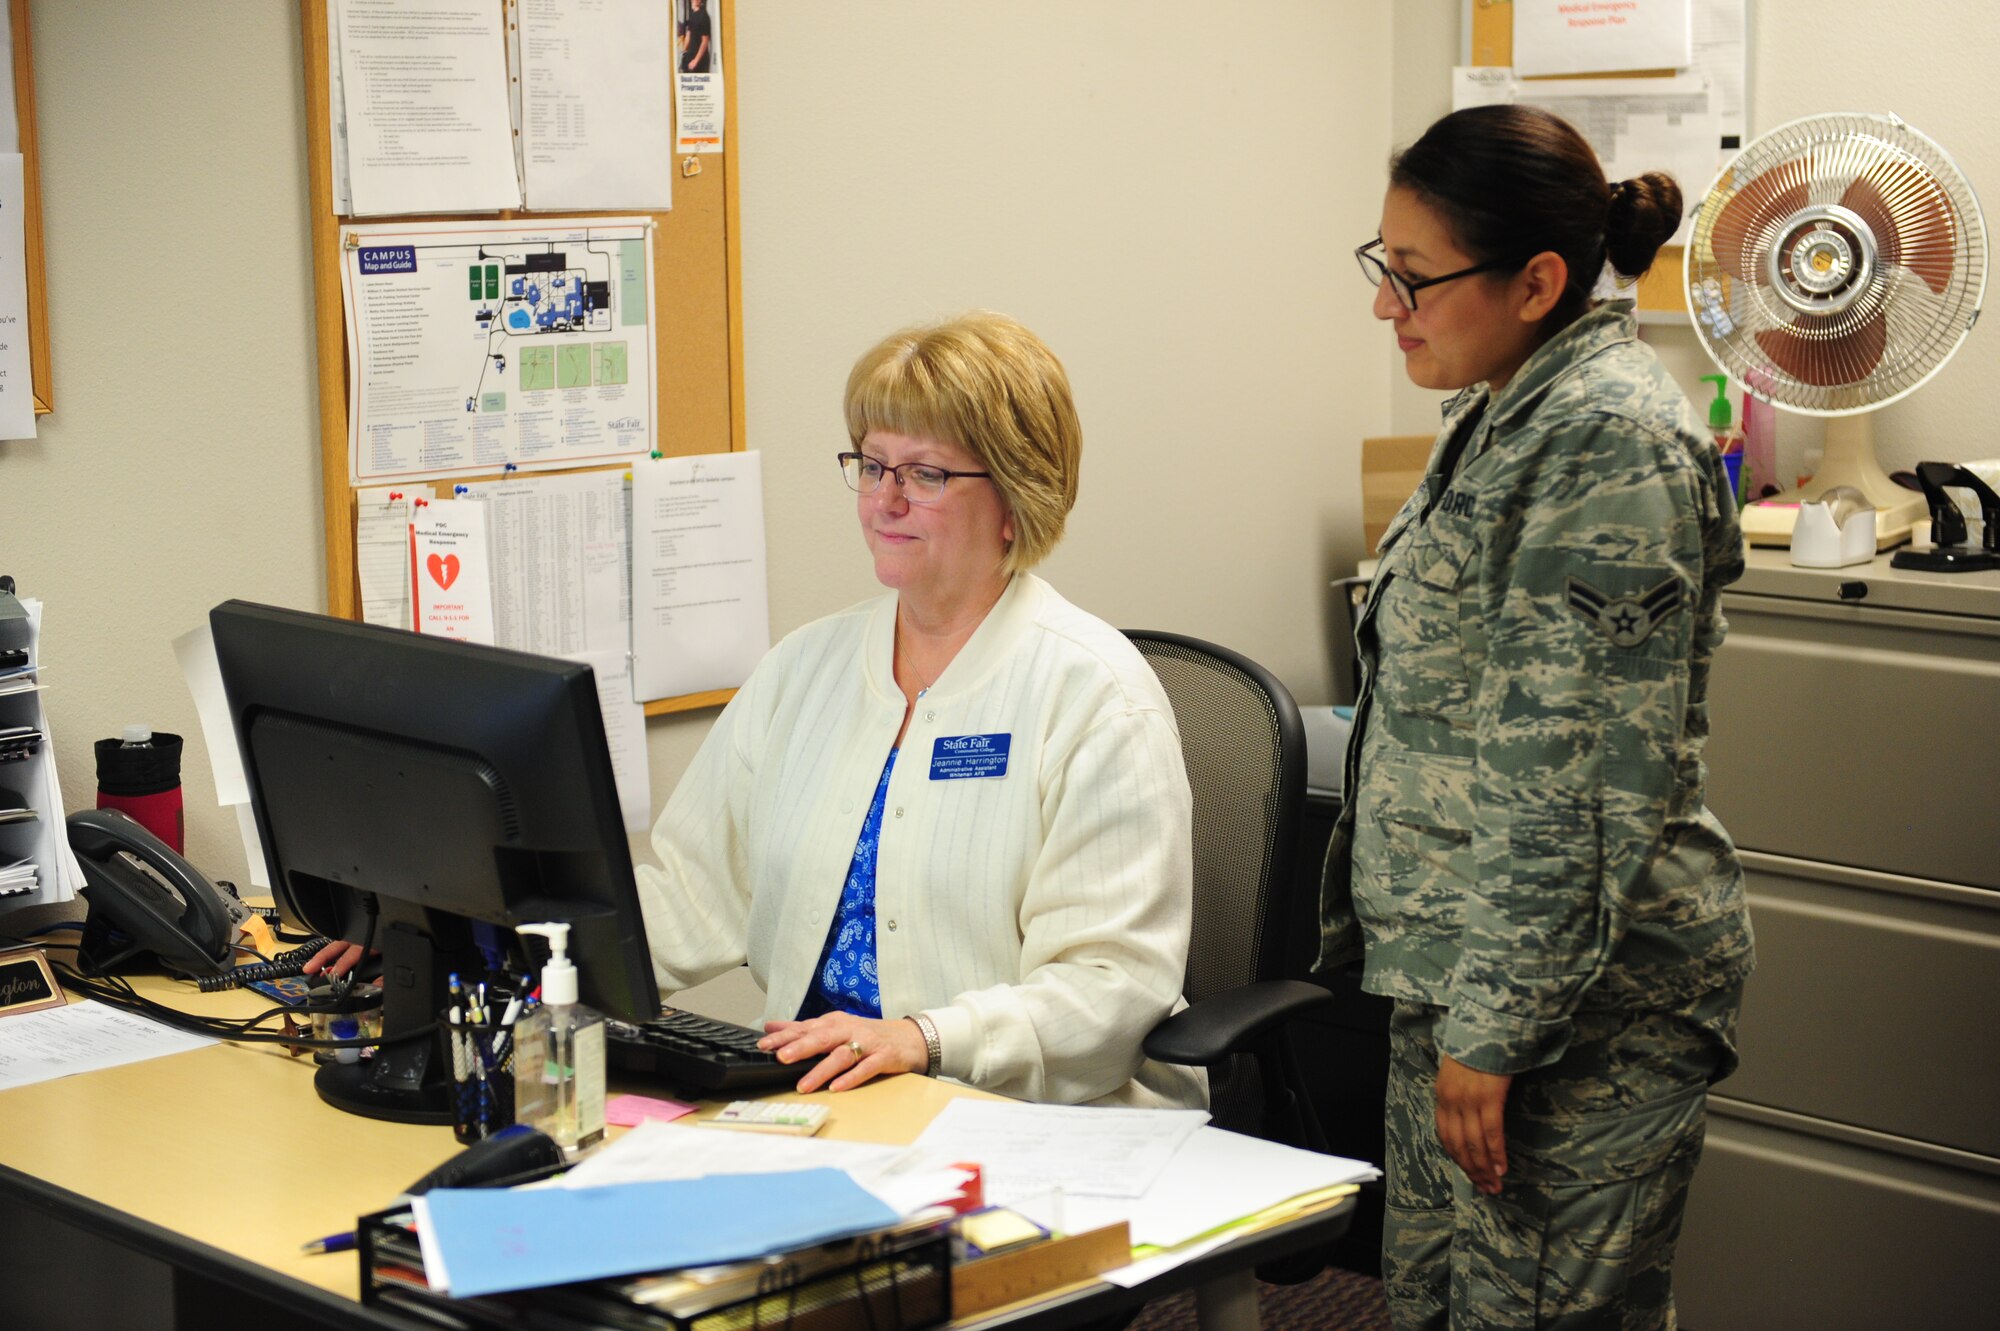 Jeannie Harrington, State Fair Community College administrative assistant, counsels Airman 1st Class Heather De Leon Ventura, 509th Maintenance Group administrator, July 30, 2015, at Whiteman Air Force Base, Mo. After speaking with an education specialist, a service member or dependent can check out the schools available at the Professional Development Center for information on the admission process or counseling on classes. (U.S. Air Force photo by Airman 1st Class Jazmin Smith/Released)